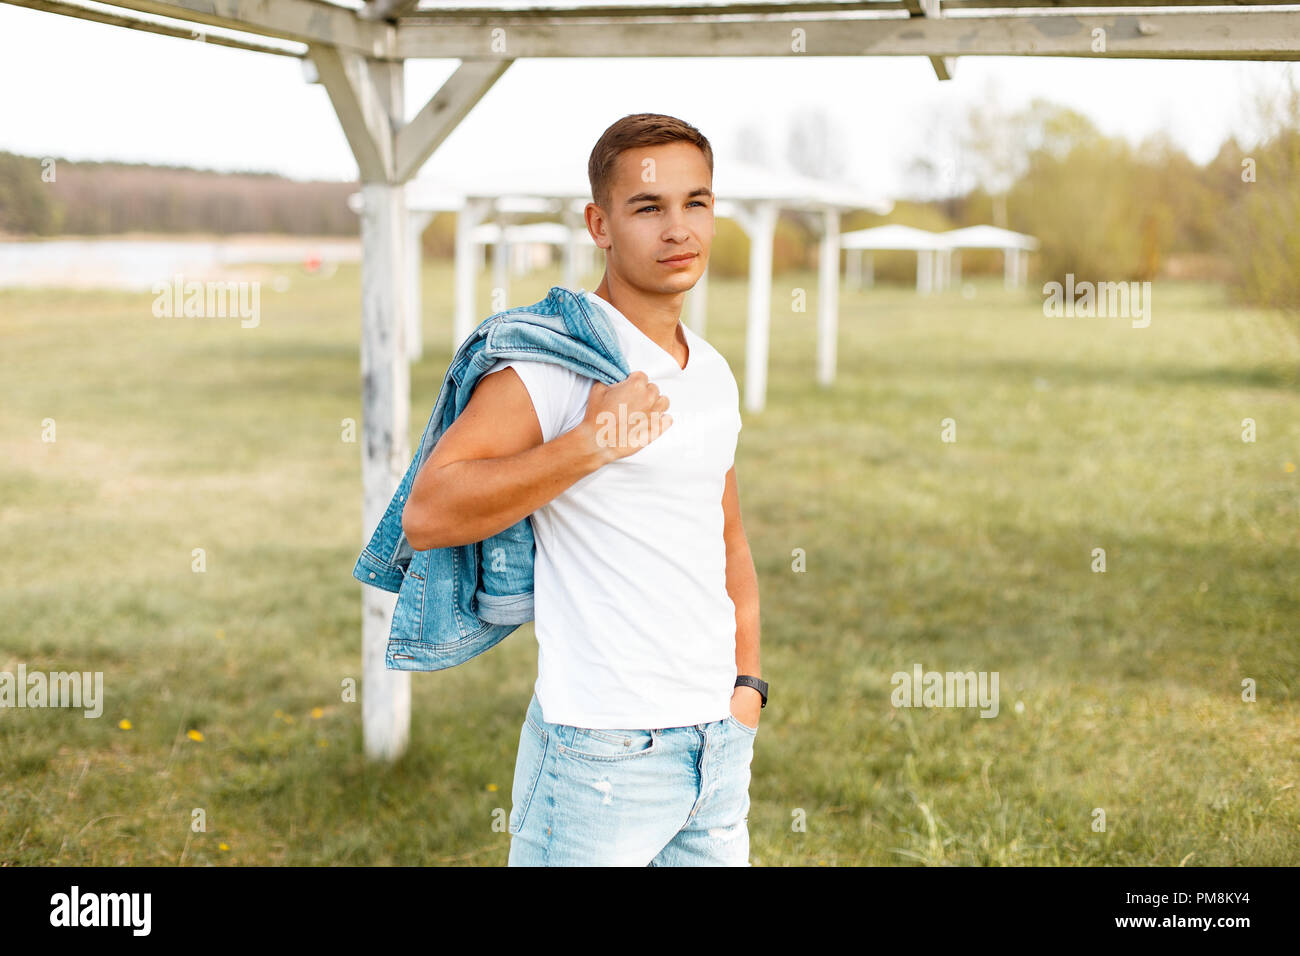 Handsome man in a white T-shirt with a jeans jacket outdoors Stock Photo